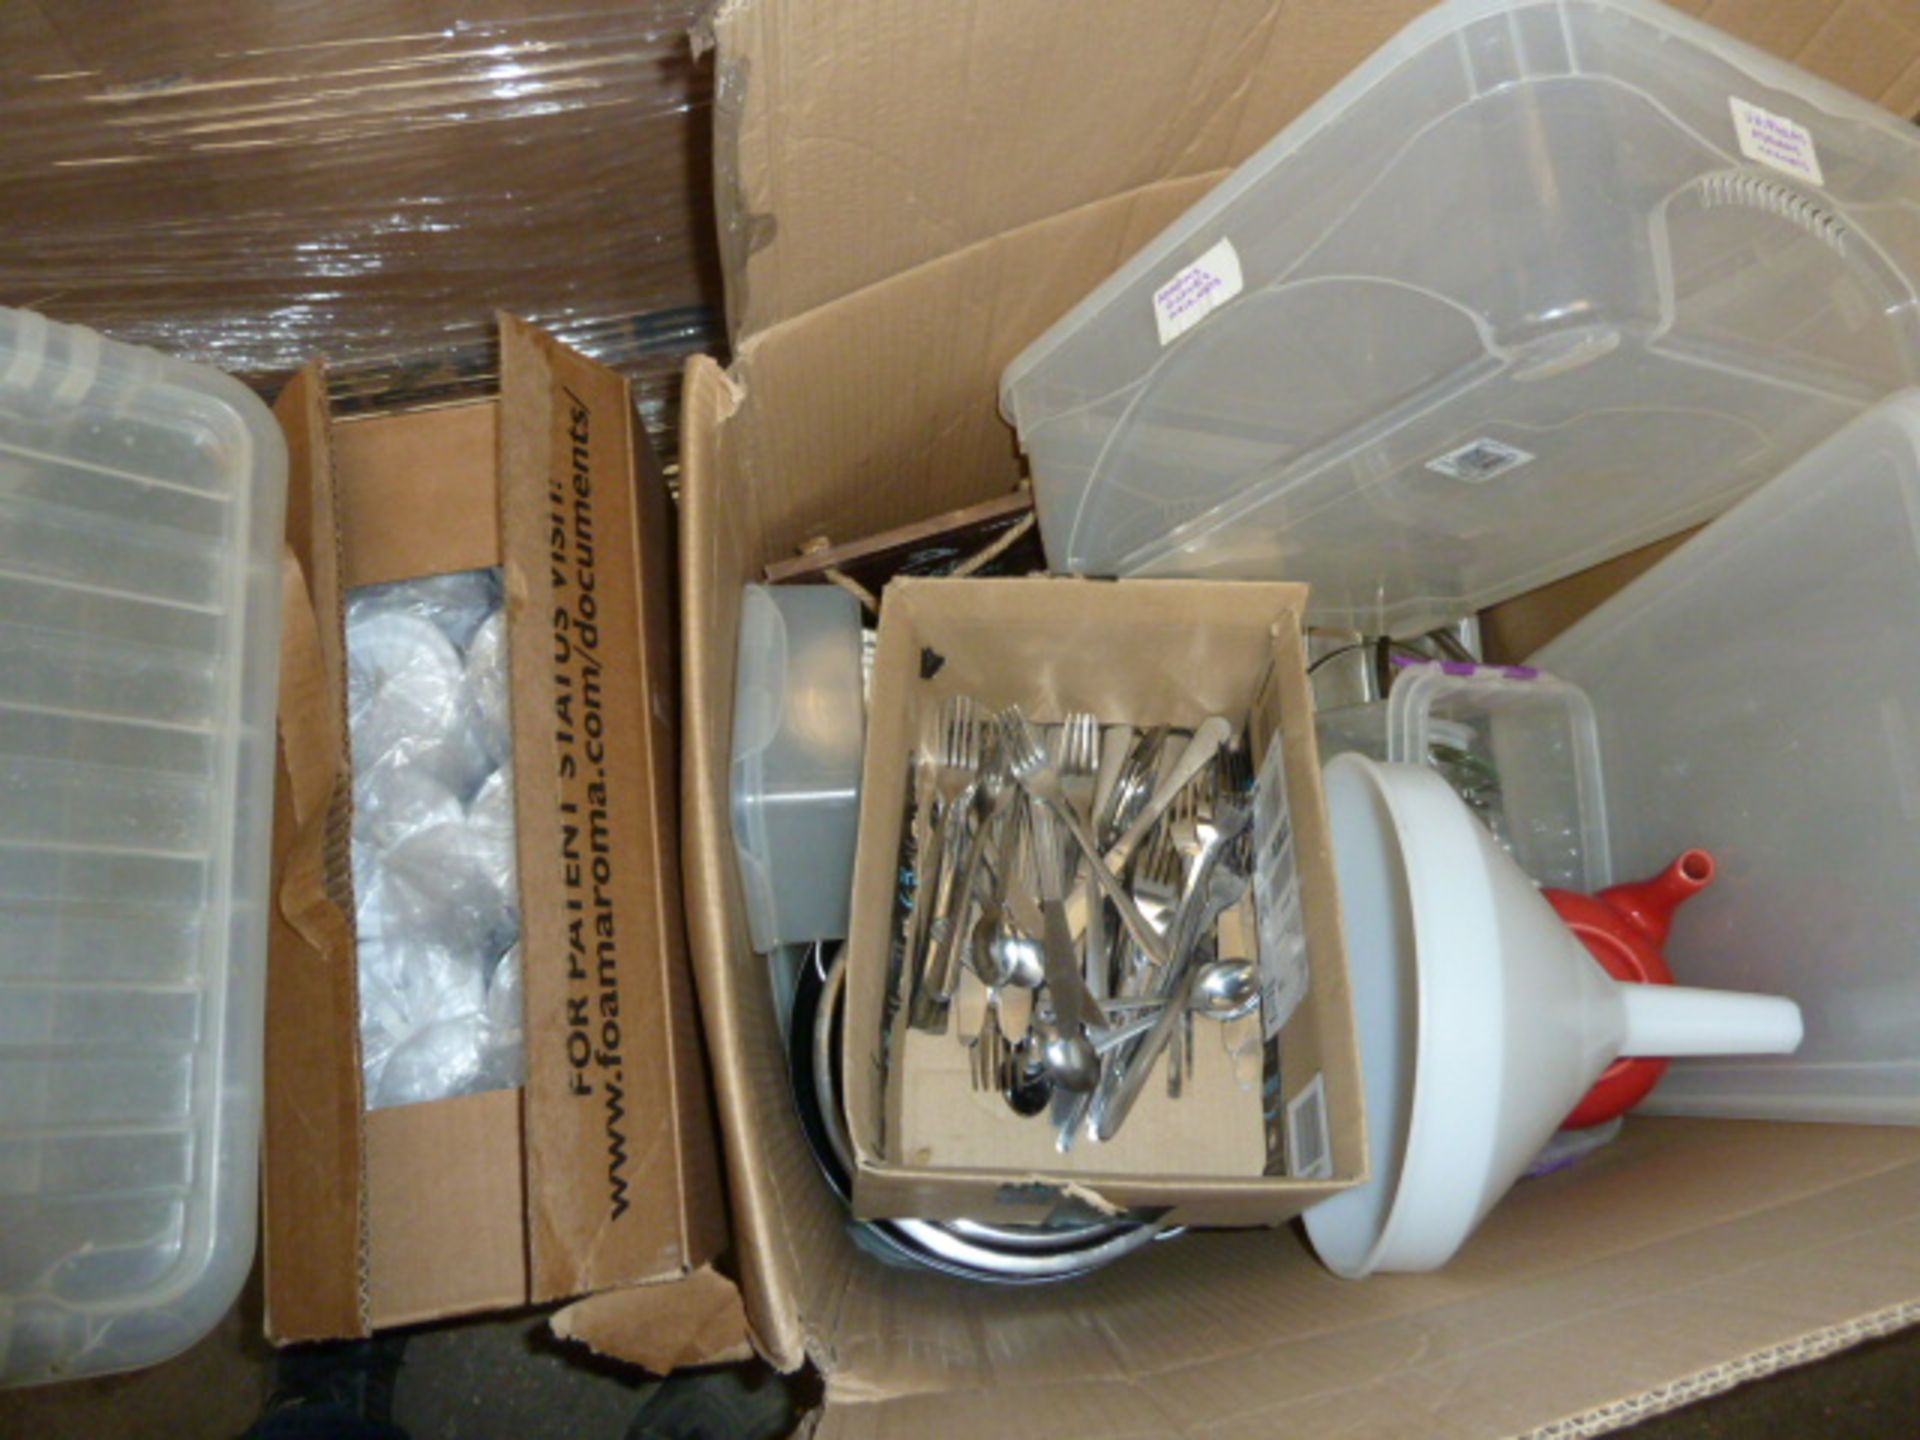 2 large boxes of assorted items incl. tupperware, stainless steel cutlery and disposable cup lids